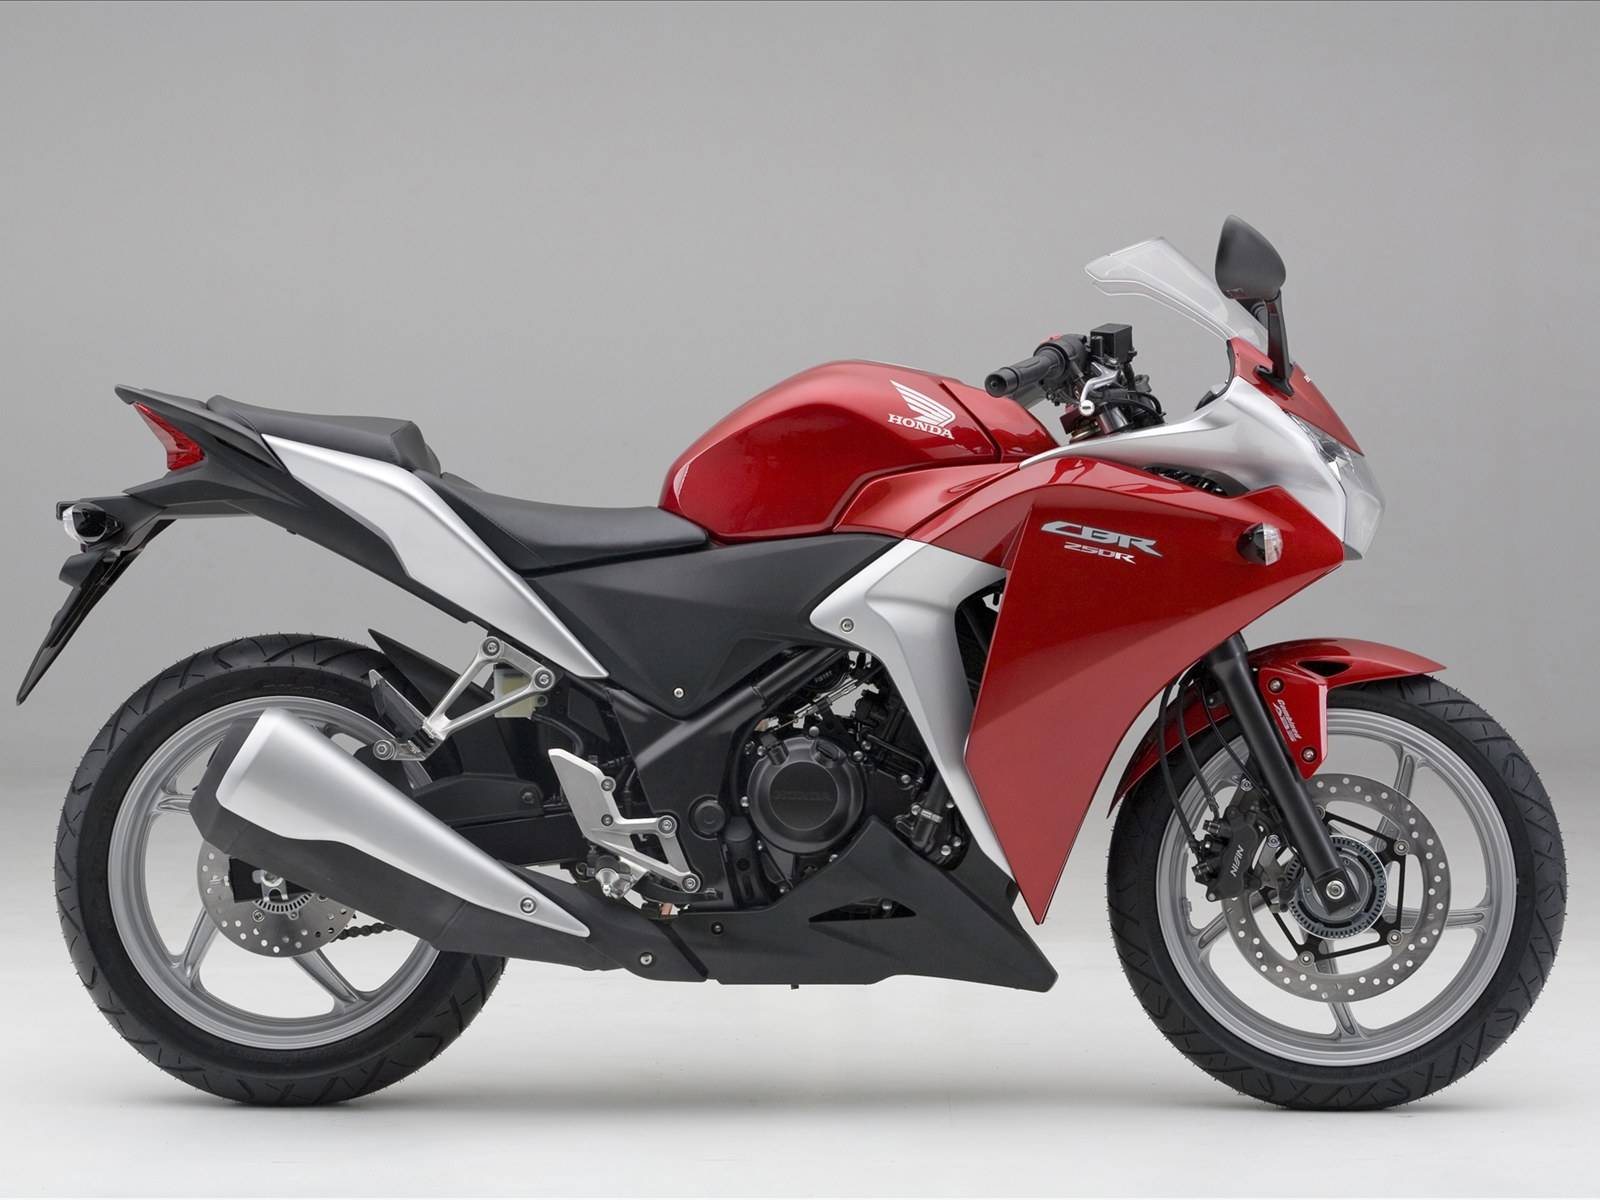 Honda cbr250r (2011 - 2013): review & buying guide